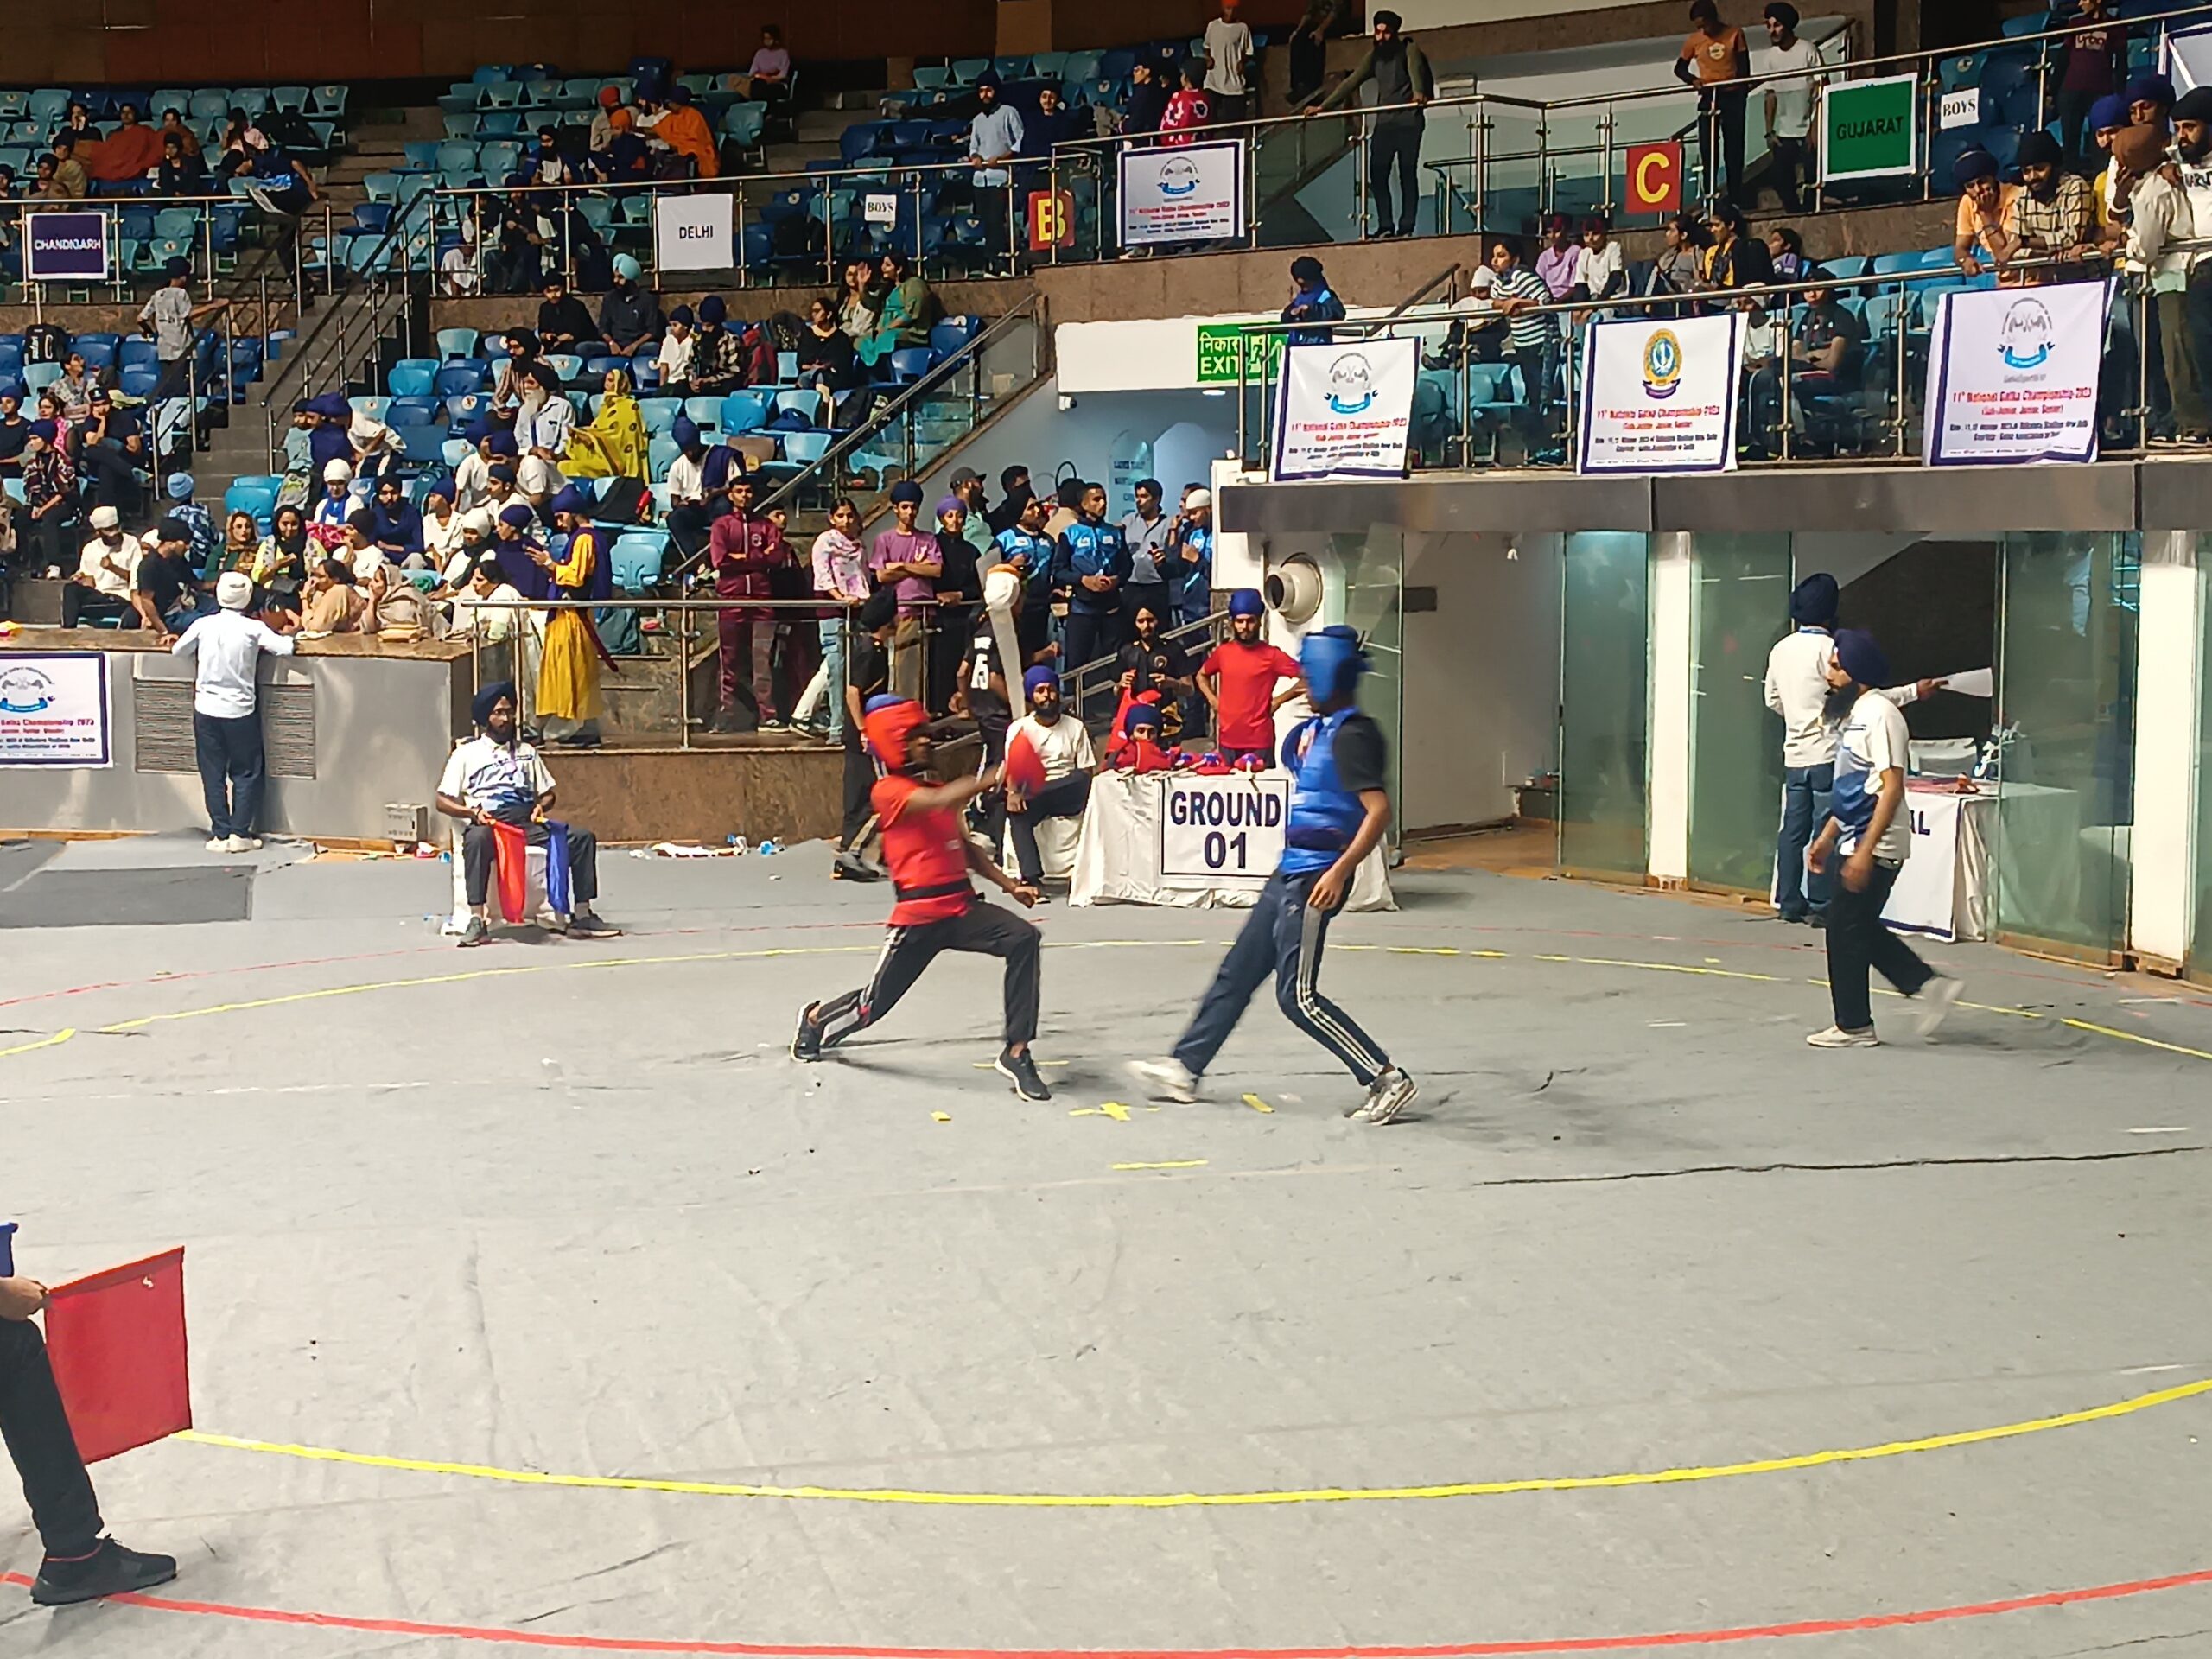 Gatka championship held in Delhi to promote the traditional Sikh martial art